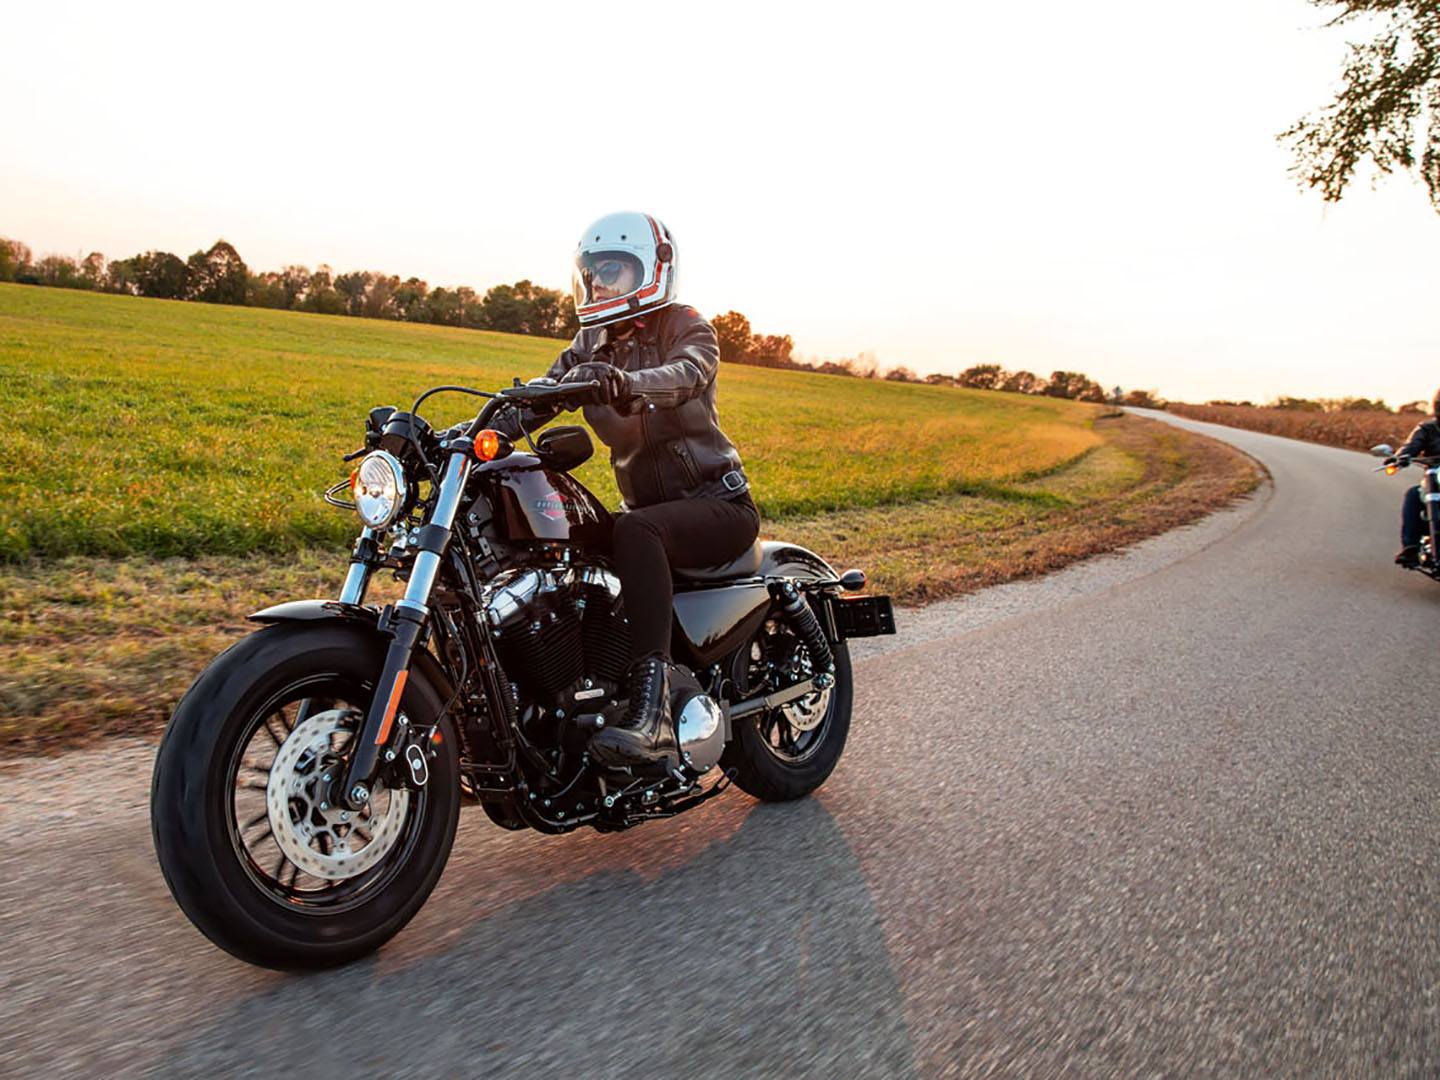 2021 Harley-Davidson Forty-Eight® in Syracuse, New York - Photo 16